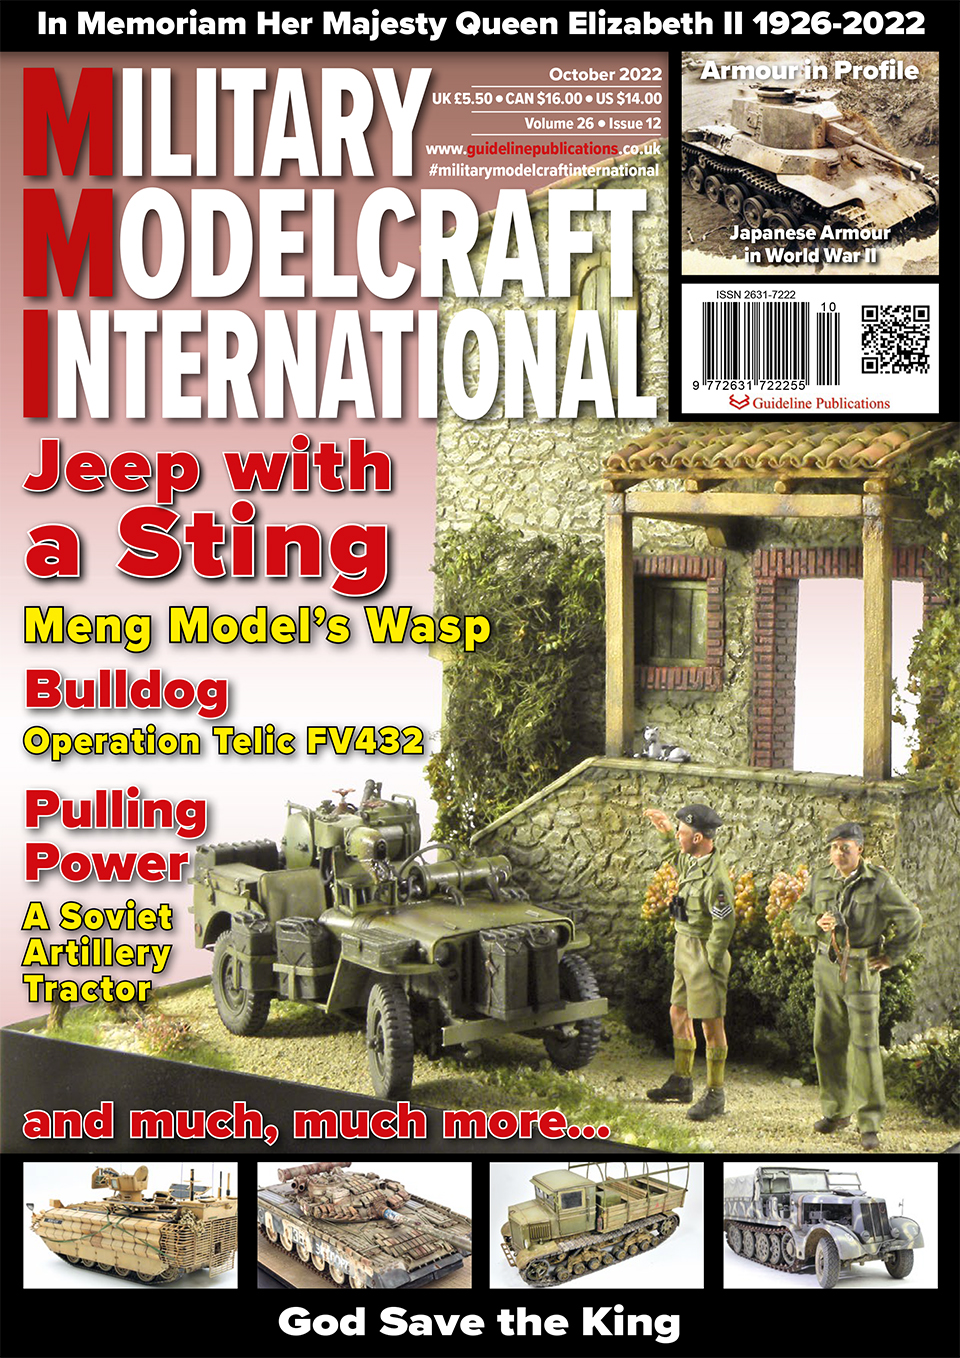 Guideline Publications Military Modelcraft Int Oct 22 